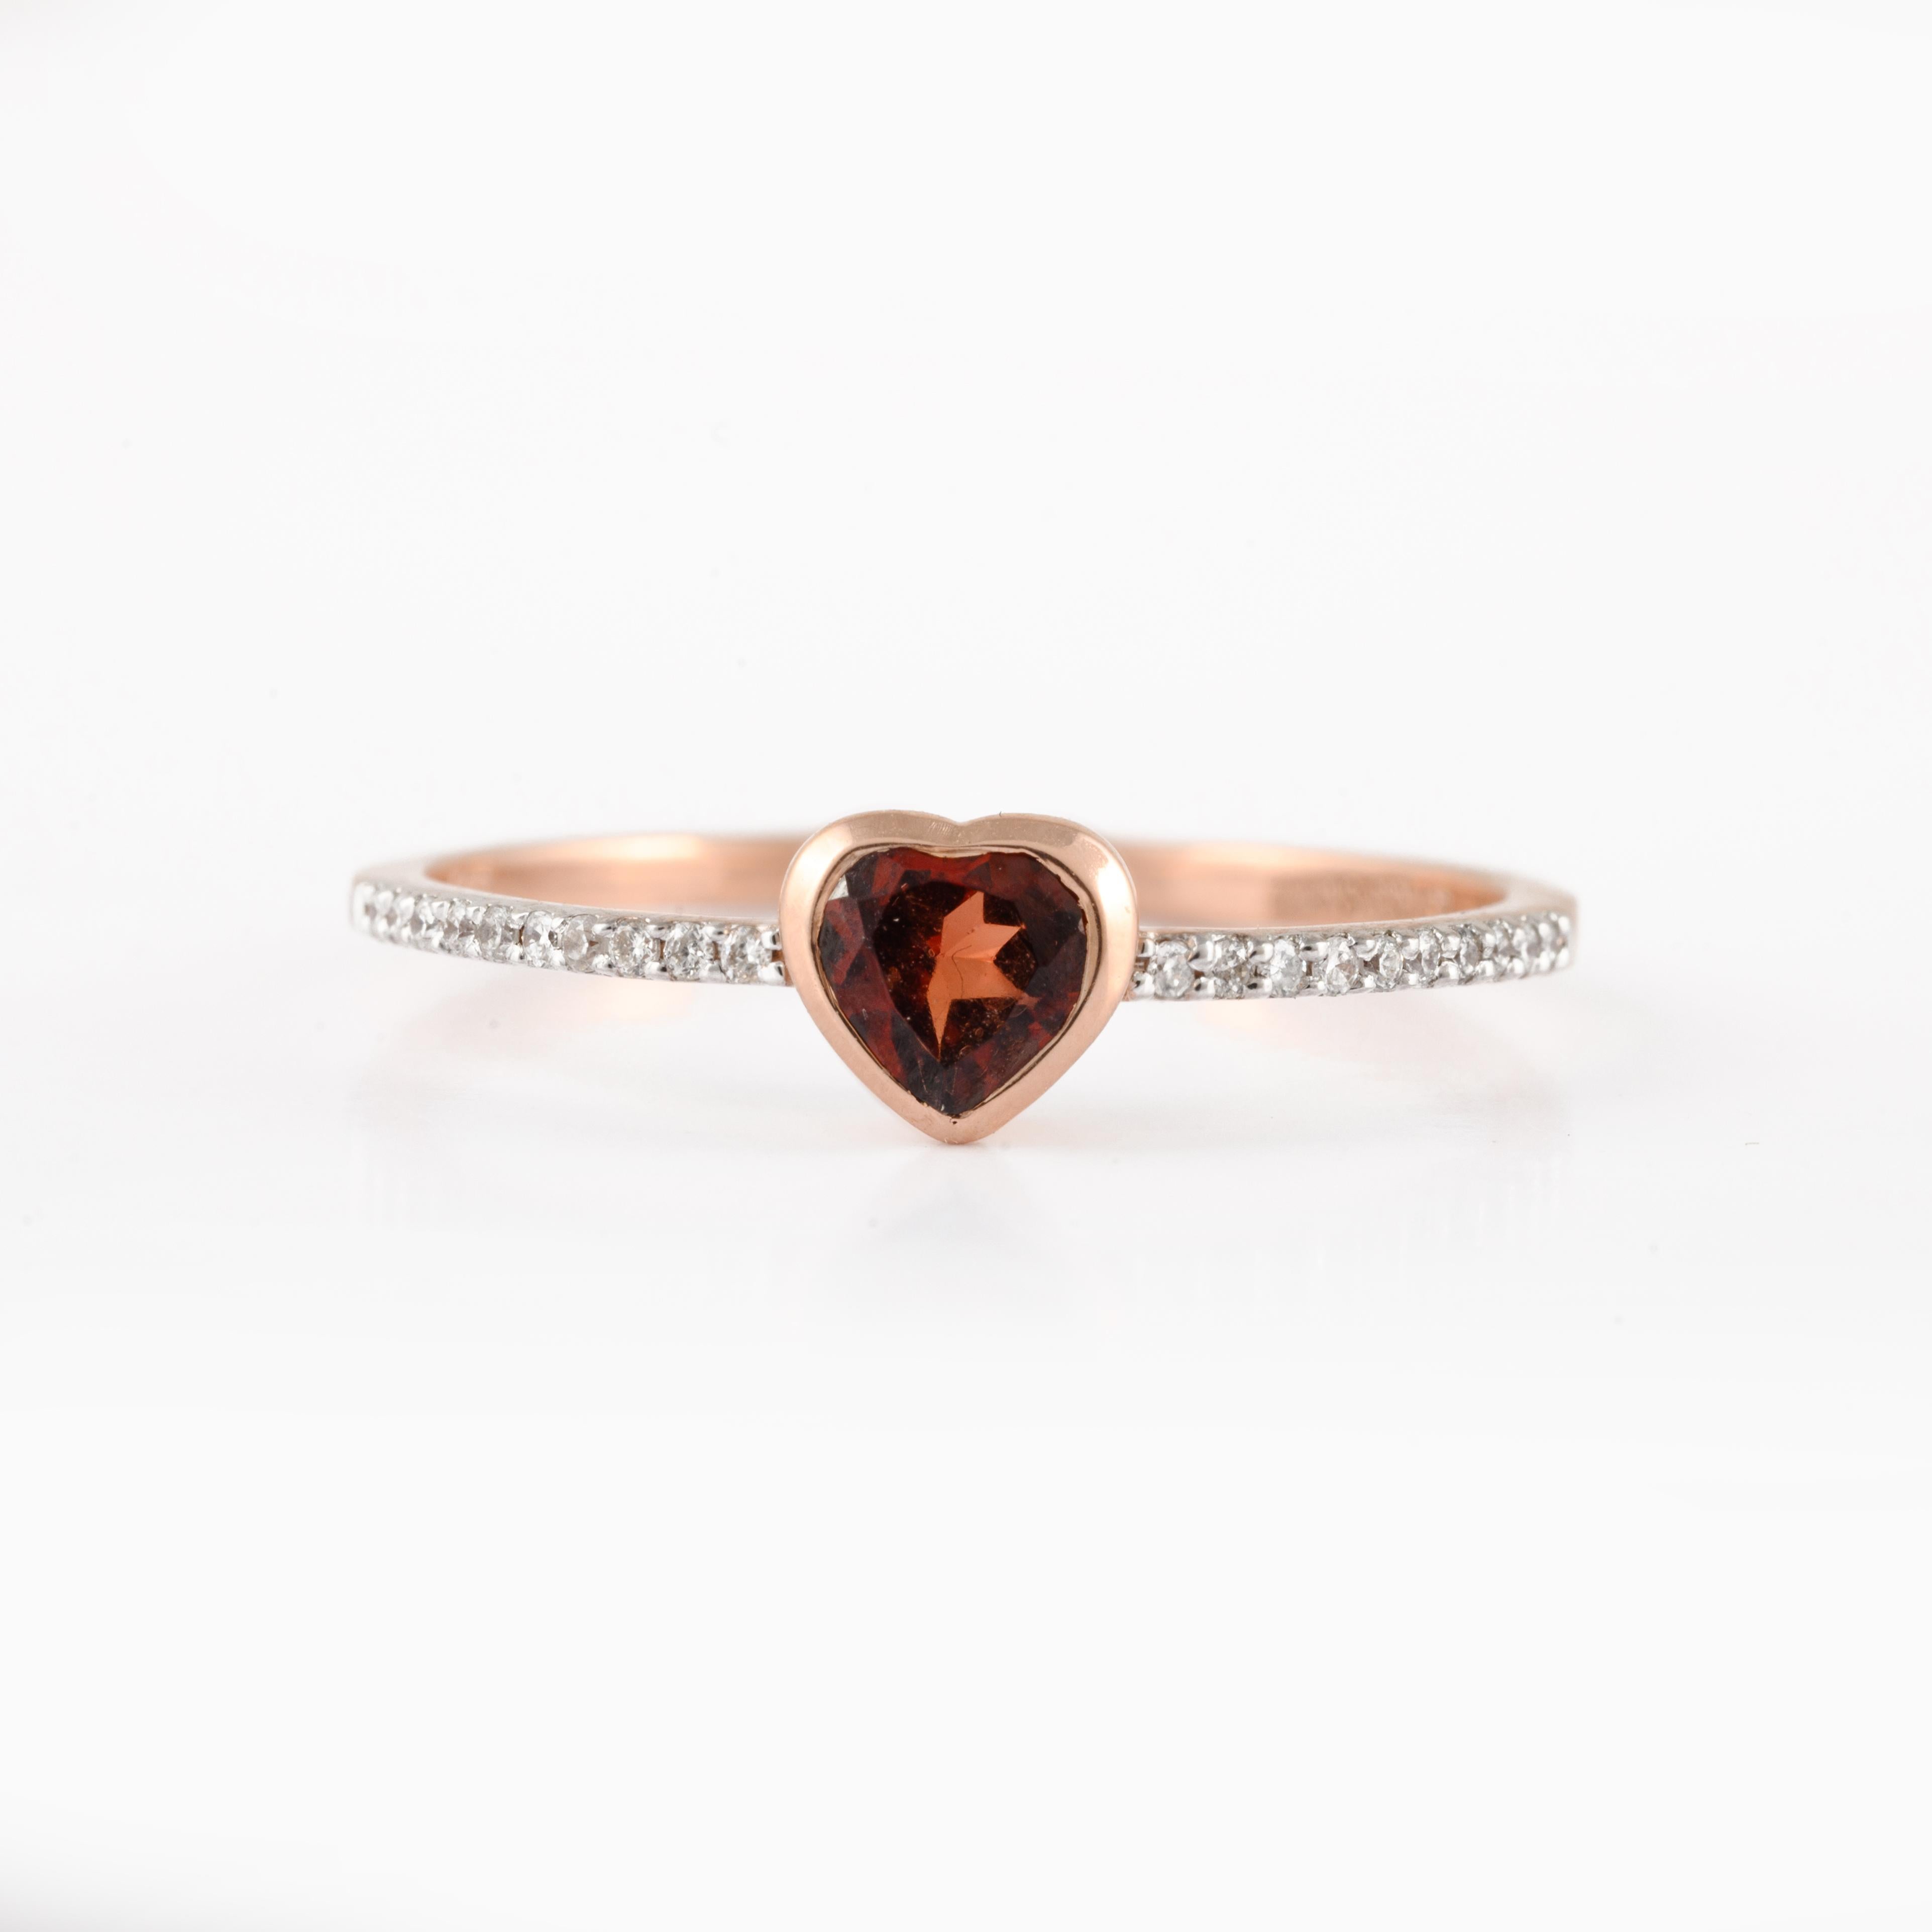 For Sale:  Dainty Heart Garnet and Diamond Engagement Ring in 18 Karat Solid Rose Gold 2